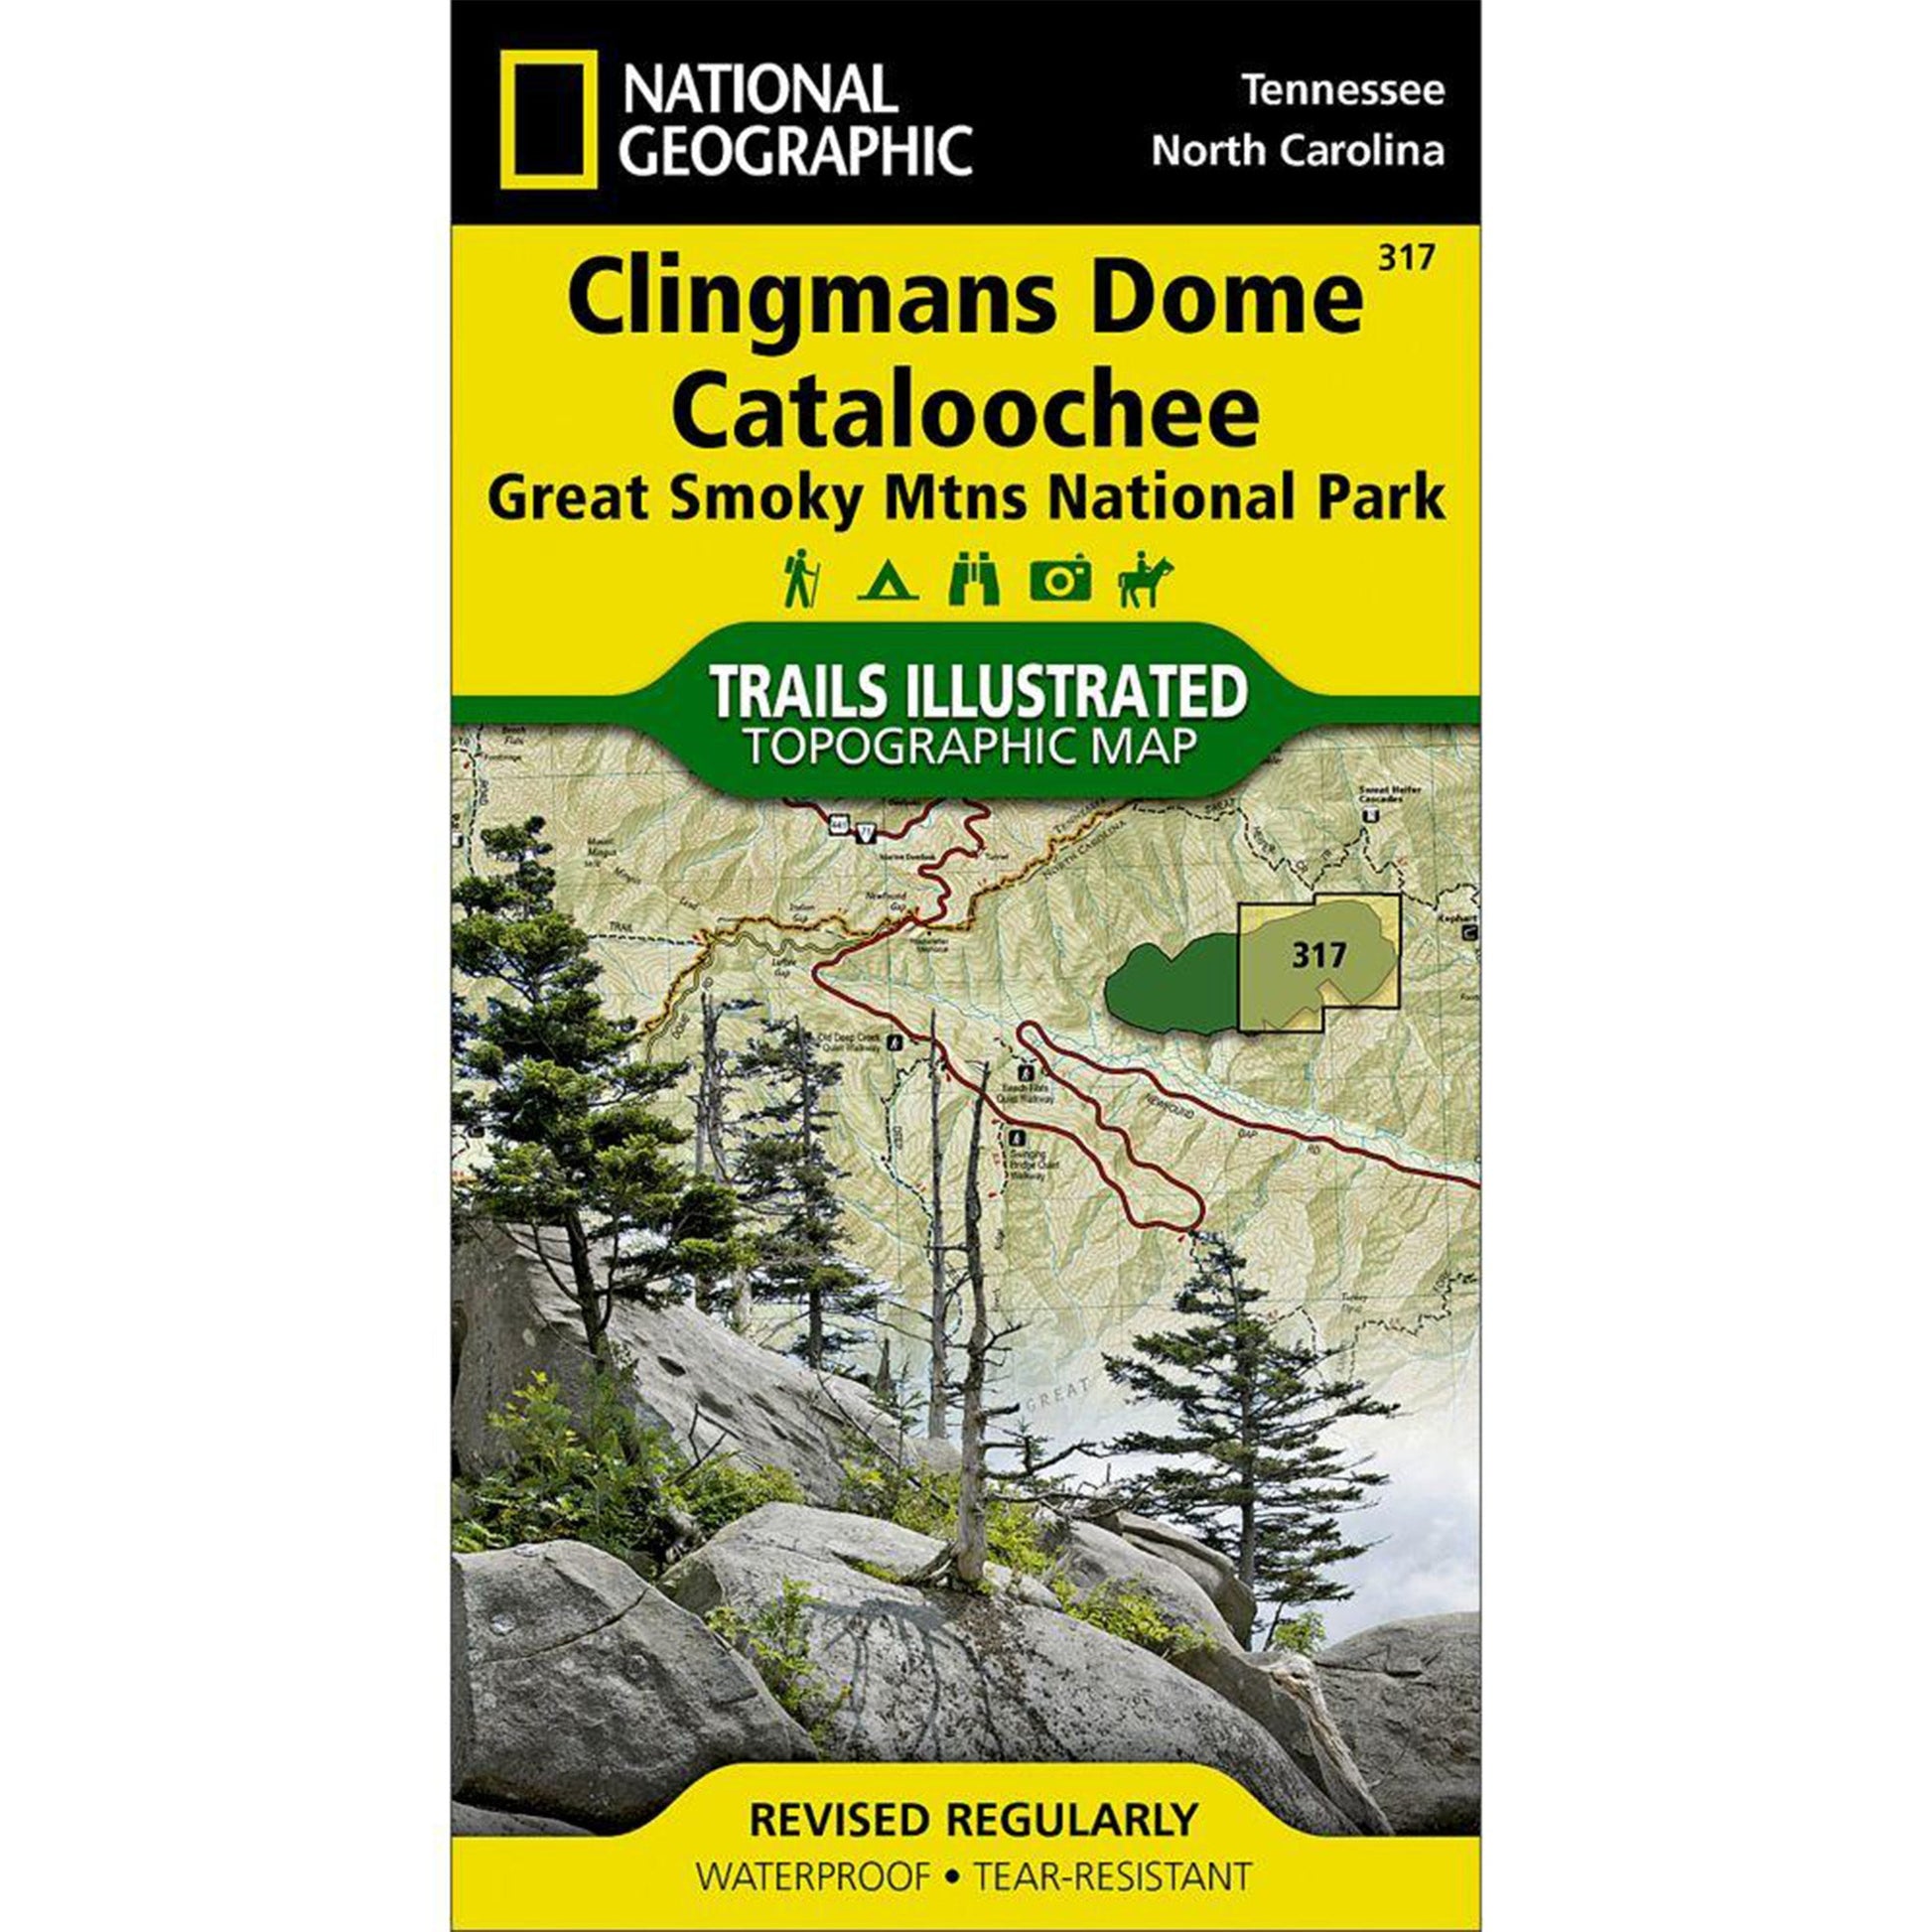 Clingmans Dome, Cataloochee: Great Smoky Mountains National Park Trail Map Big Adventure Outfitters